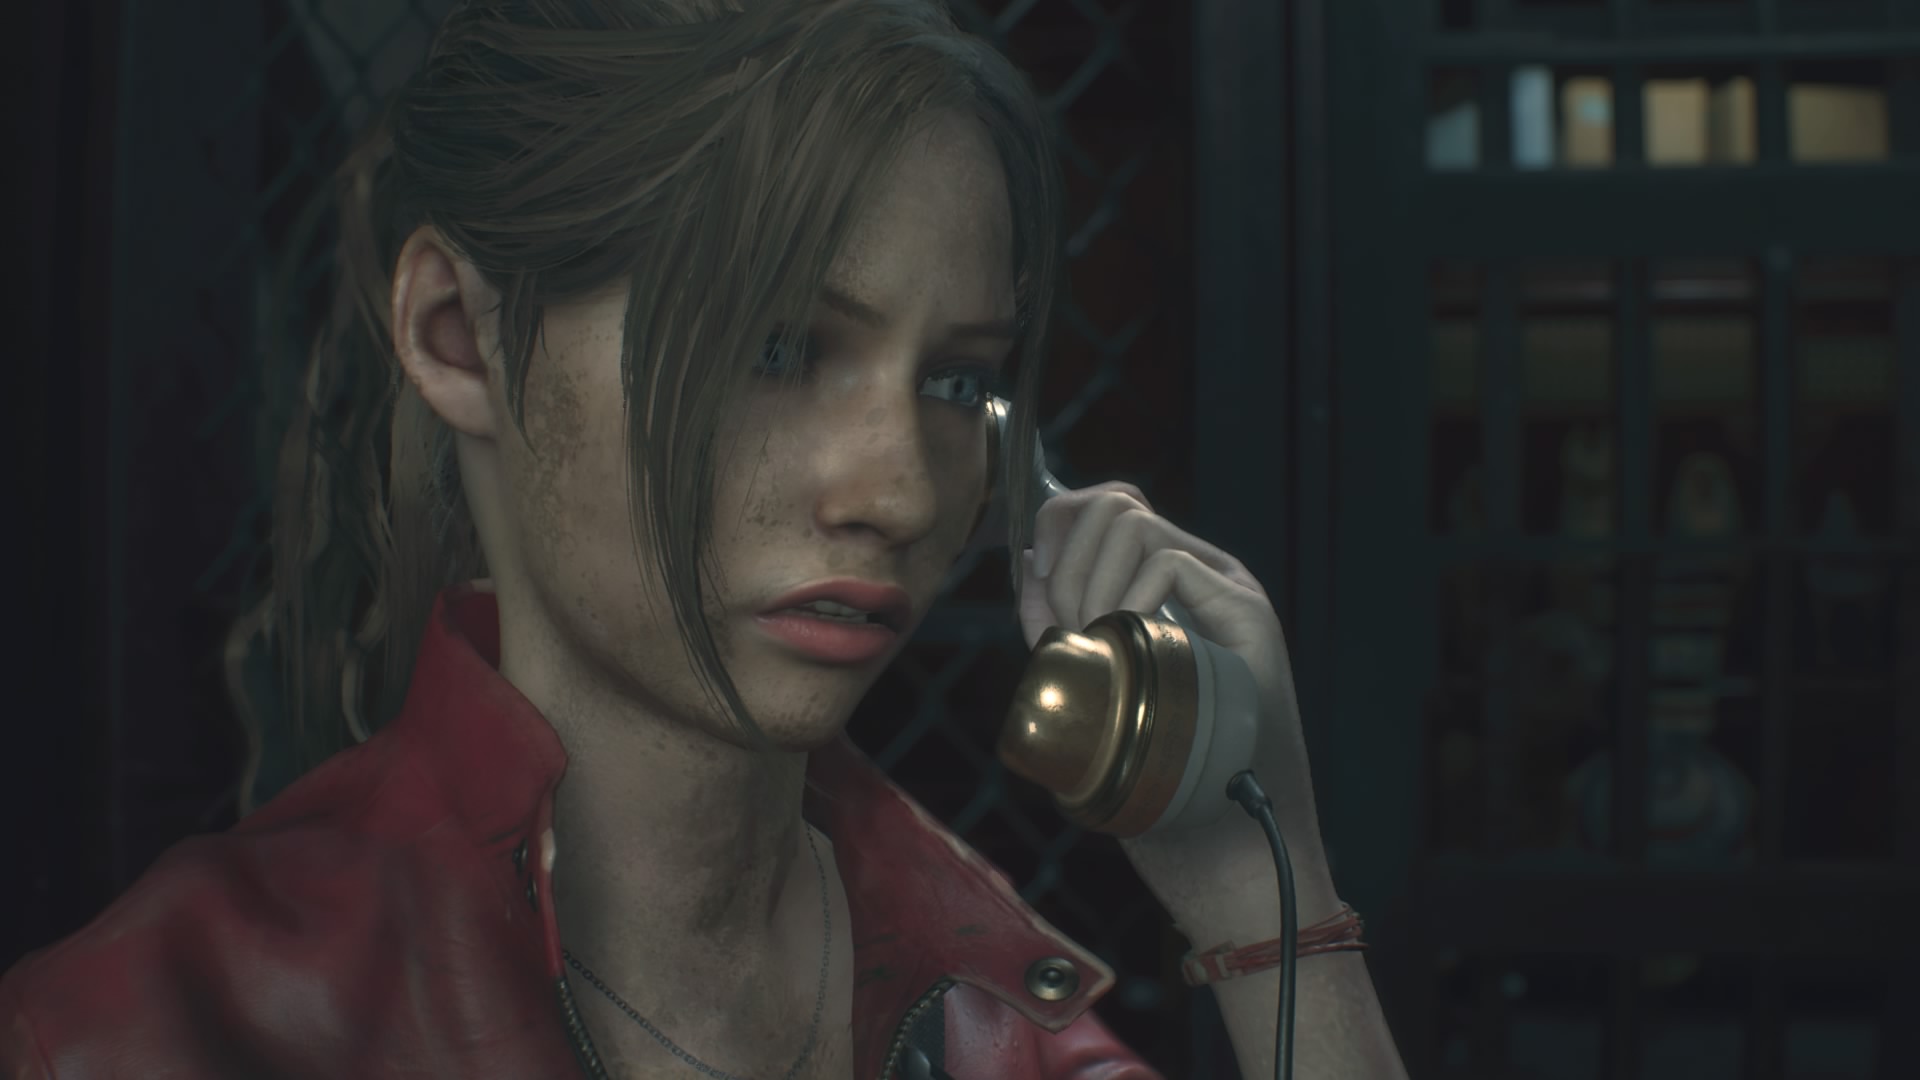 Resident Evil 2 Remake Resident Evil 2 Resident Evil PlayStation 4 PlayStation Claire Redfield Scree 1920x1080